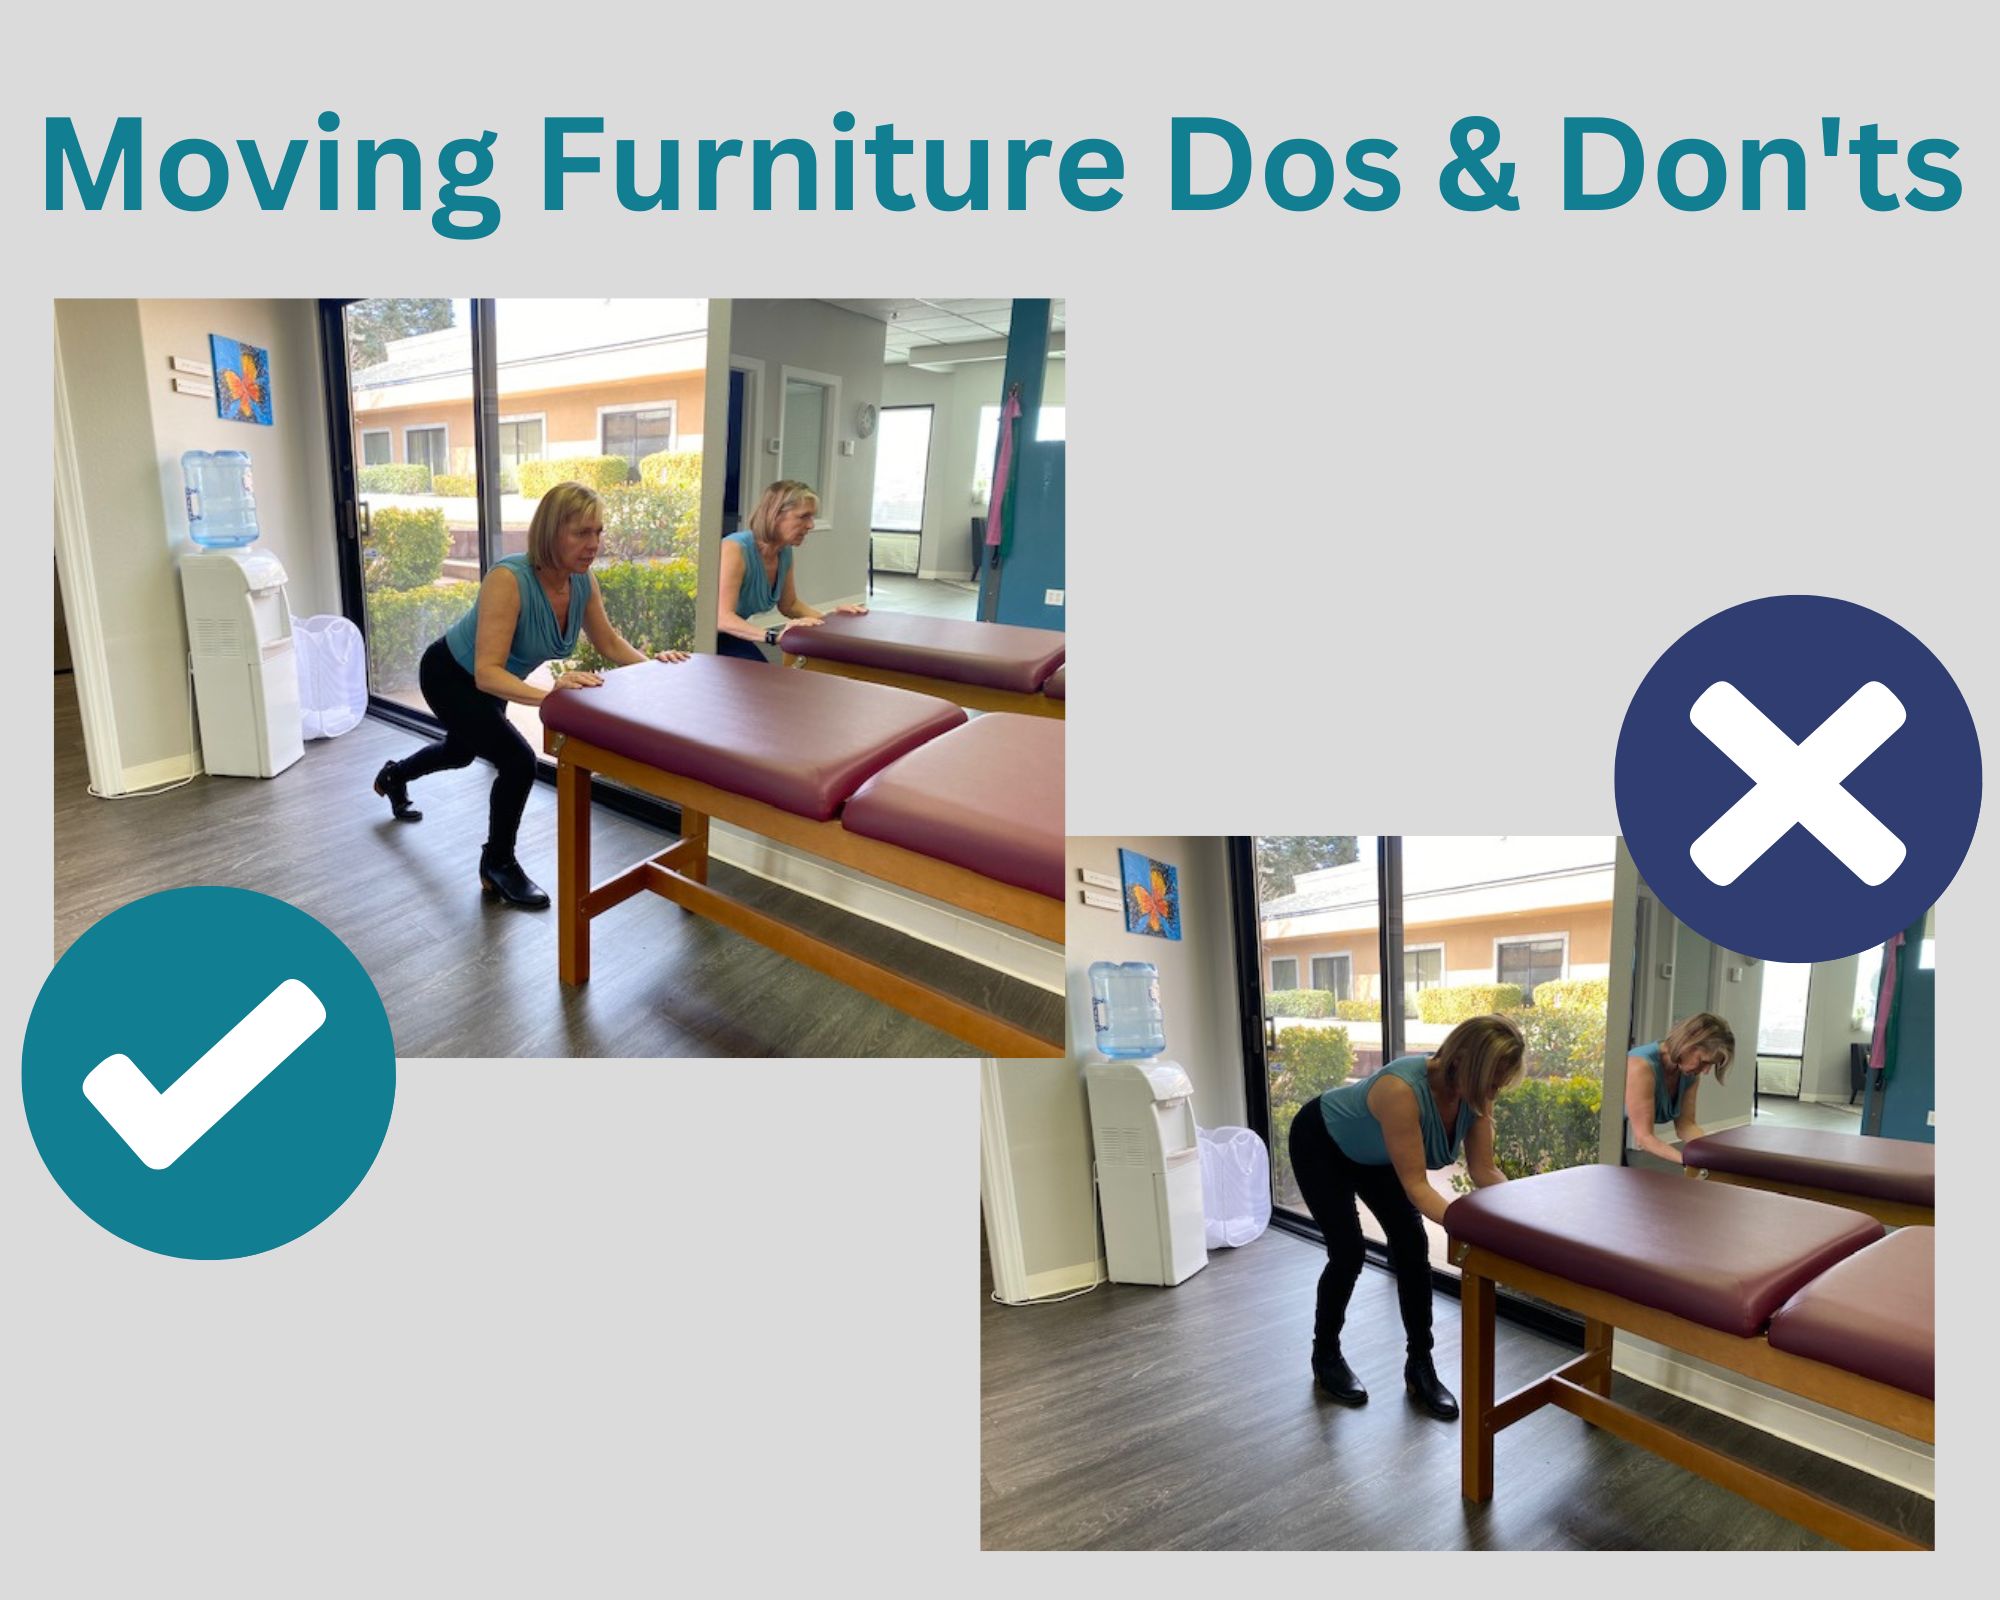 Moving Furniture dos and don'ts